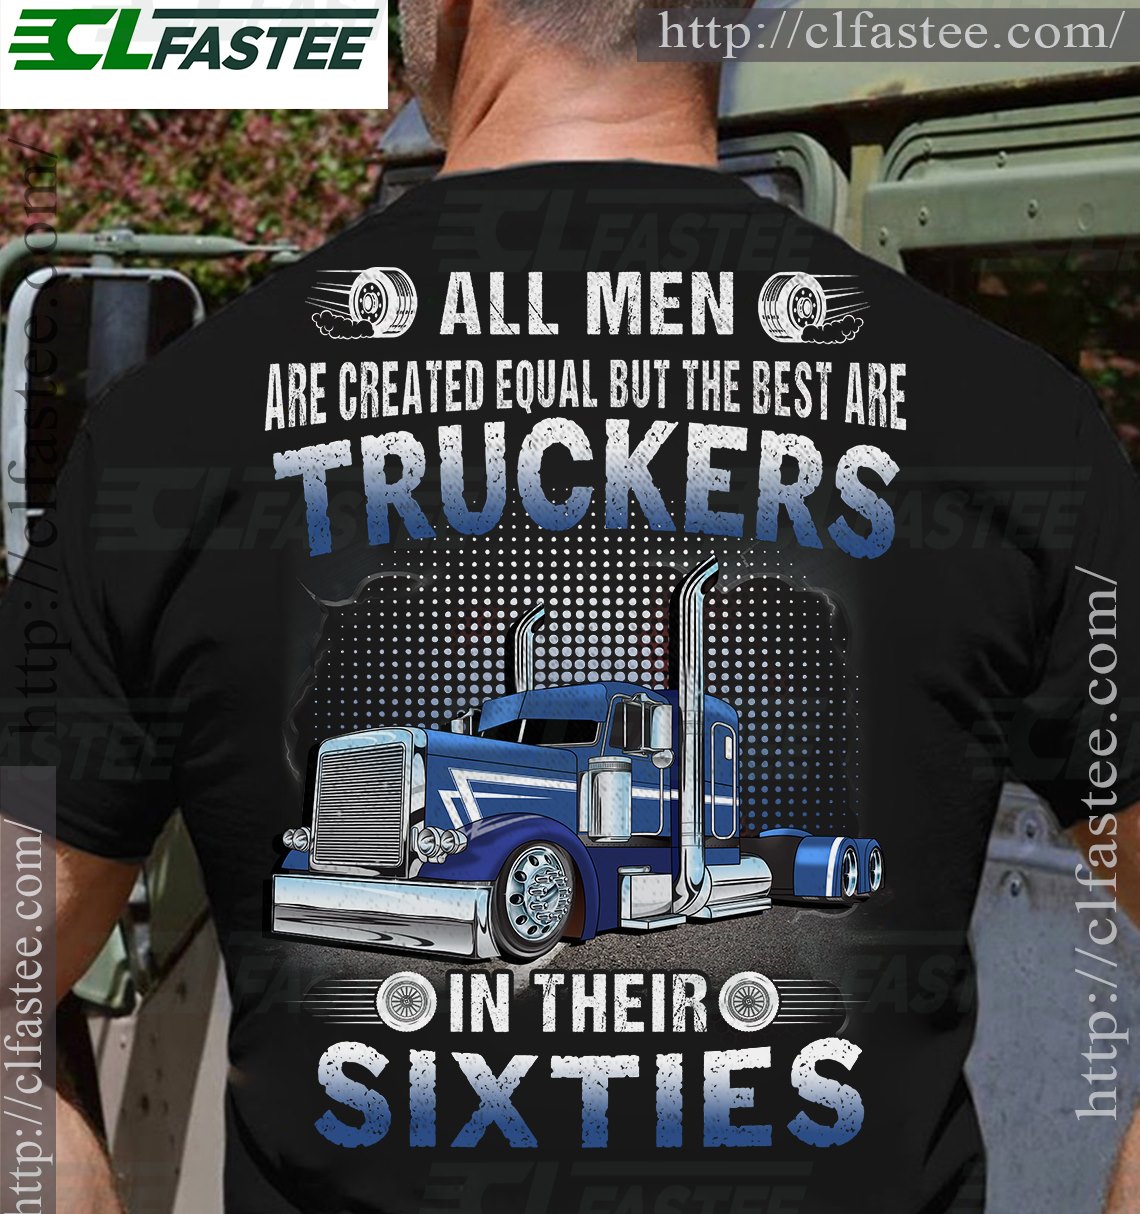 All men are created equal but the best are truckers in their sixties